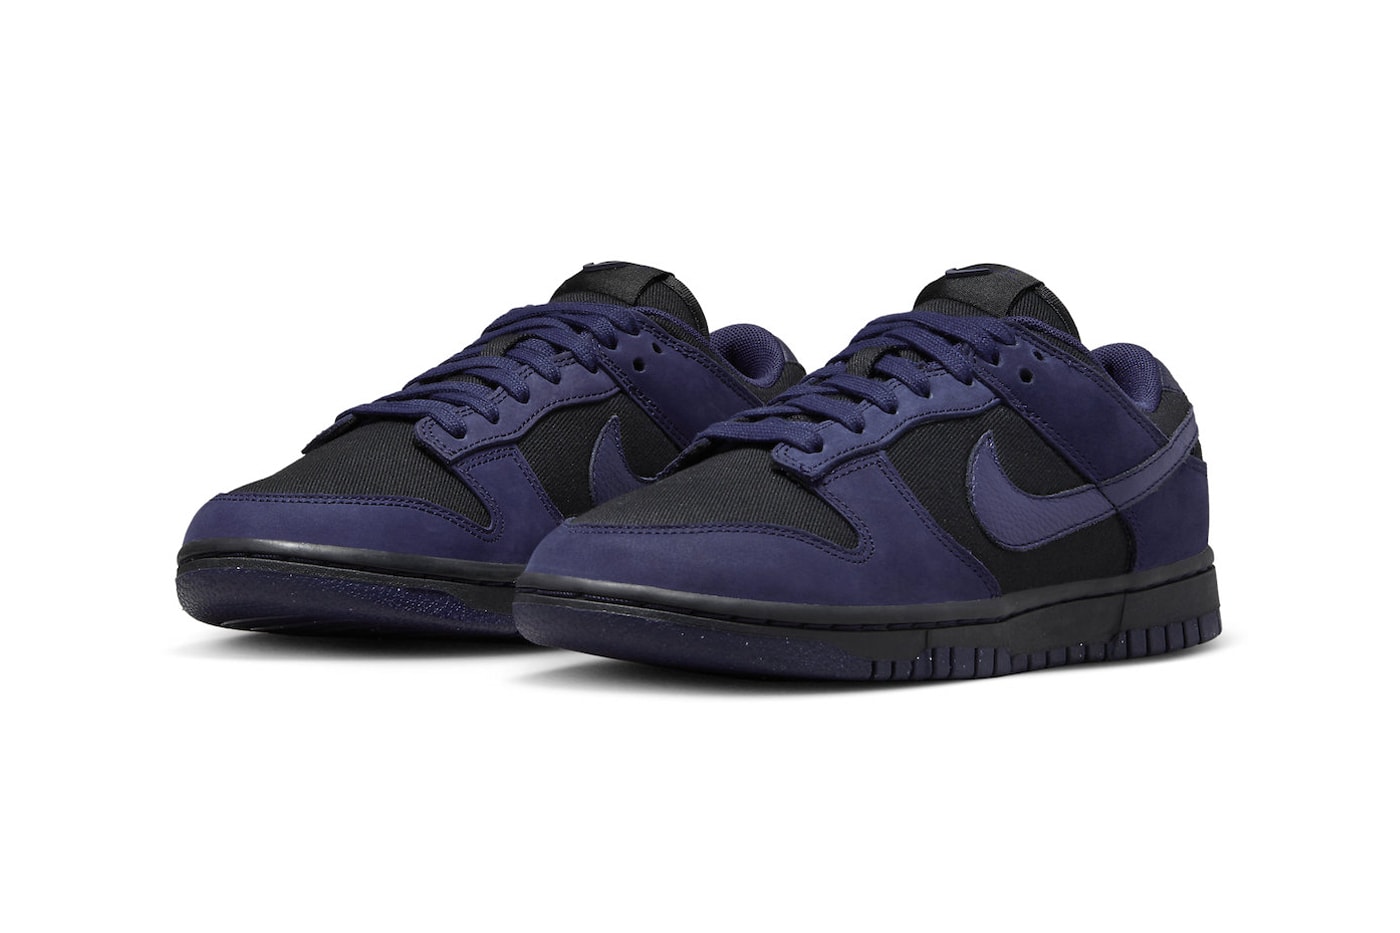 Official Look at the Nike Dunk Low in "Purple Ink" FB7720-001 womens canvas suede dark ominous speckled swoosh